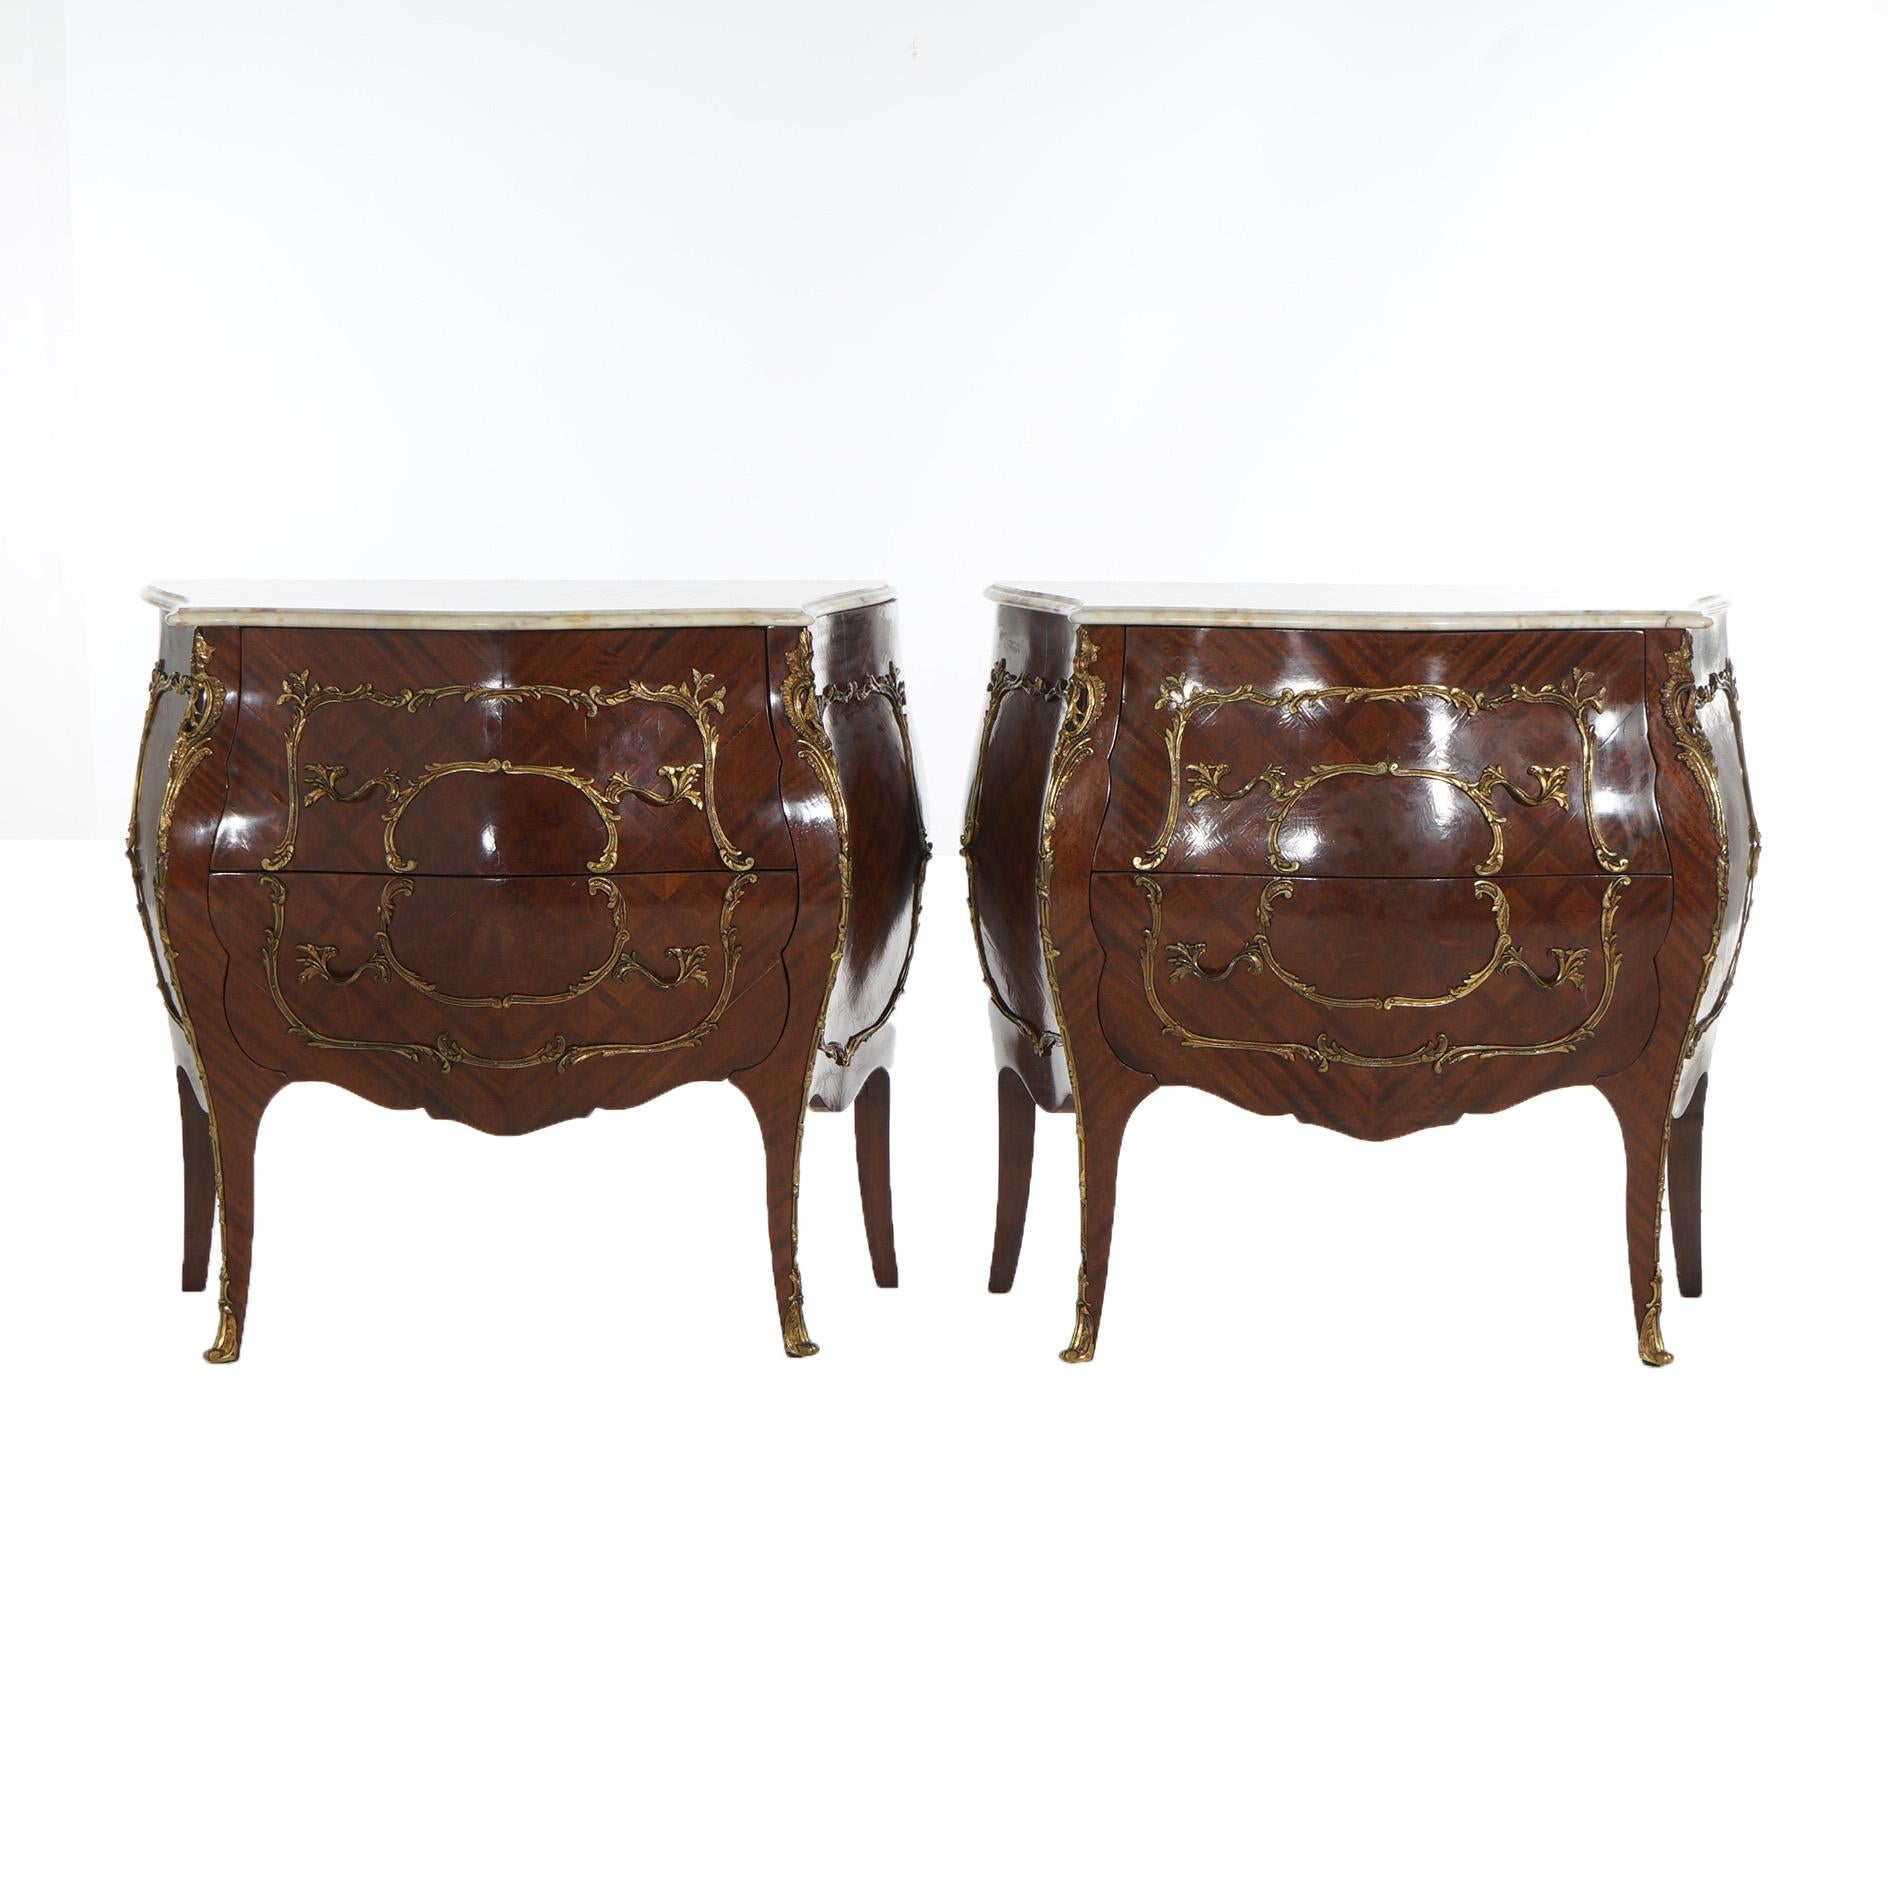 20th Century Pair Antique French Louis XIV Parquetry & Ormolu Marble Top Bomb Commodes C1940